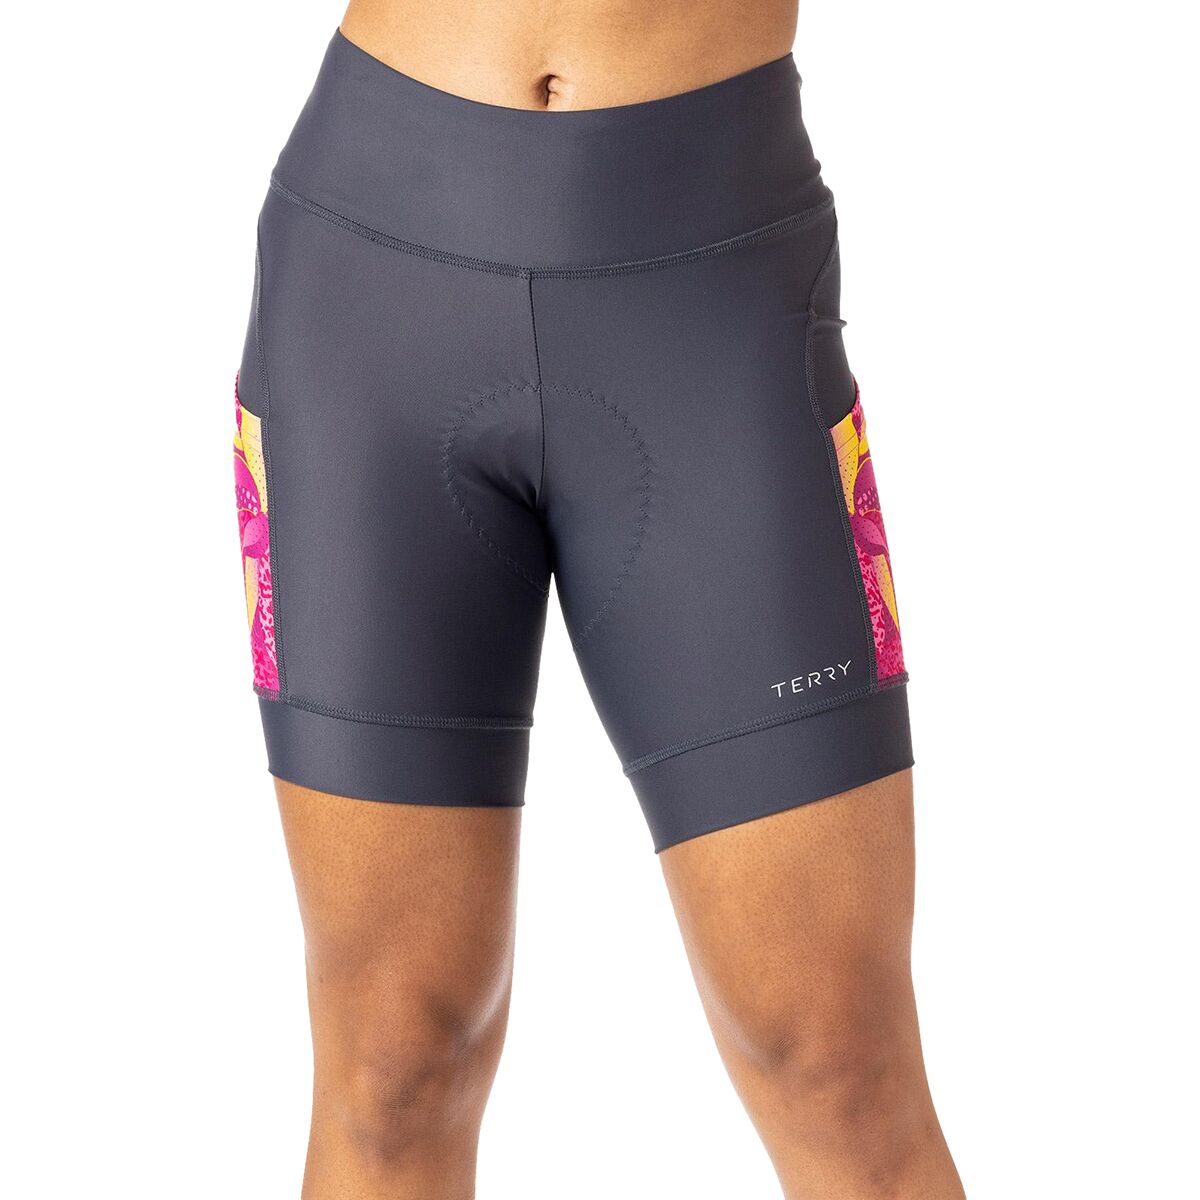 Terry Bicycles Soleil Short - Women's